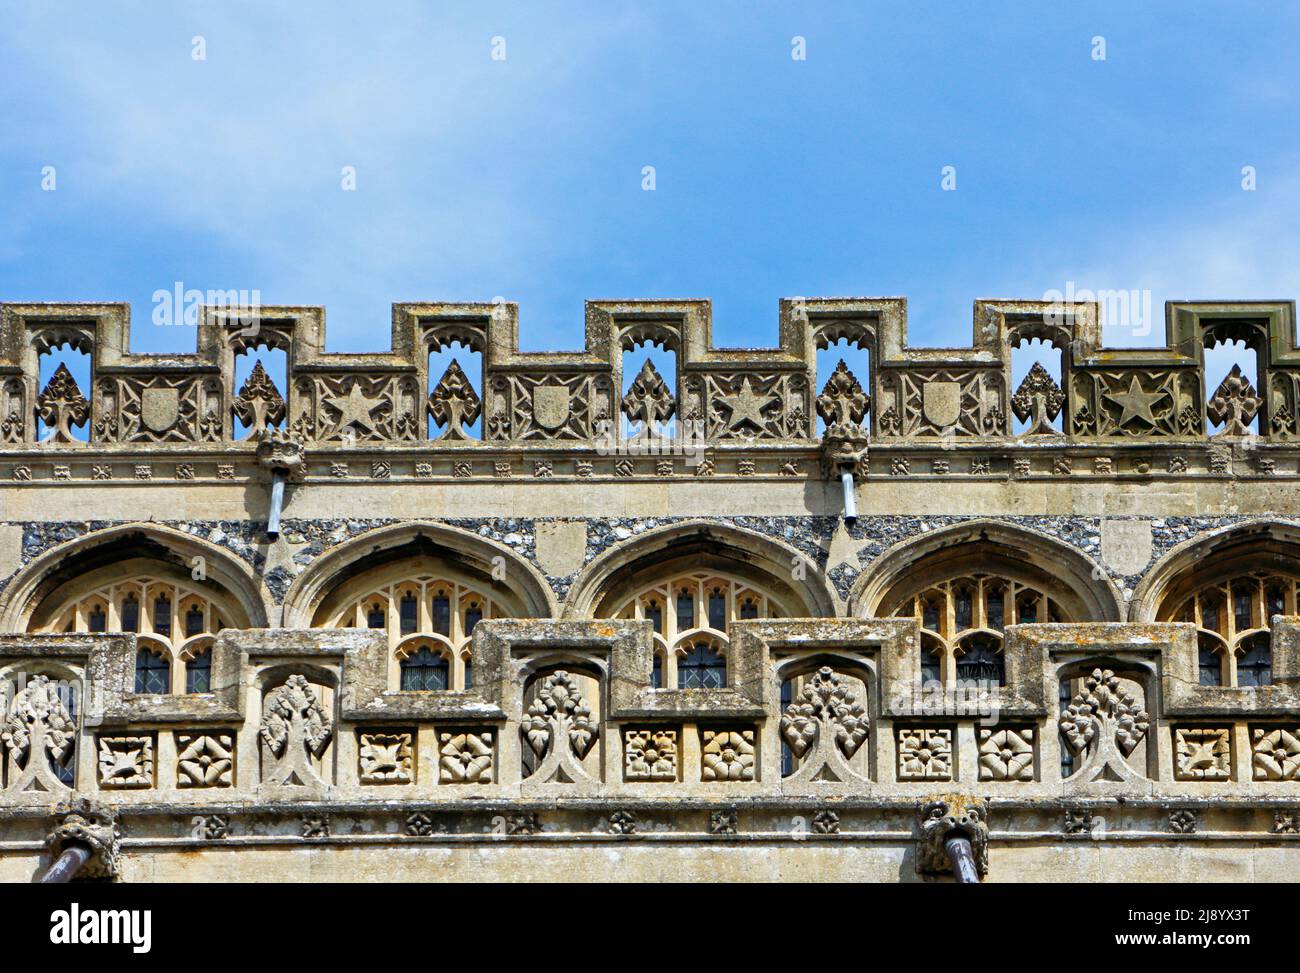 A view of the detailed carved stonework on the clerestory and open battlements at the parish Church of St Peter and St Paul at Lavenhan, Suffolk, UK. Stock Photo